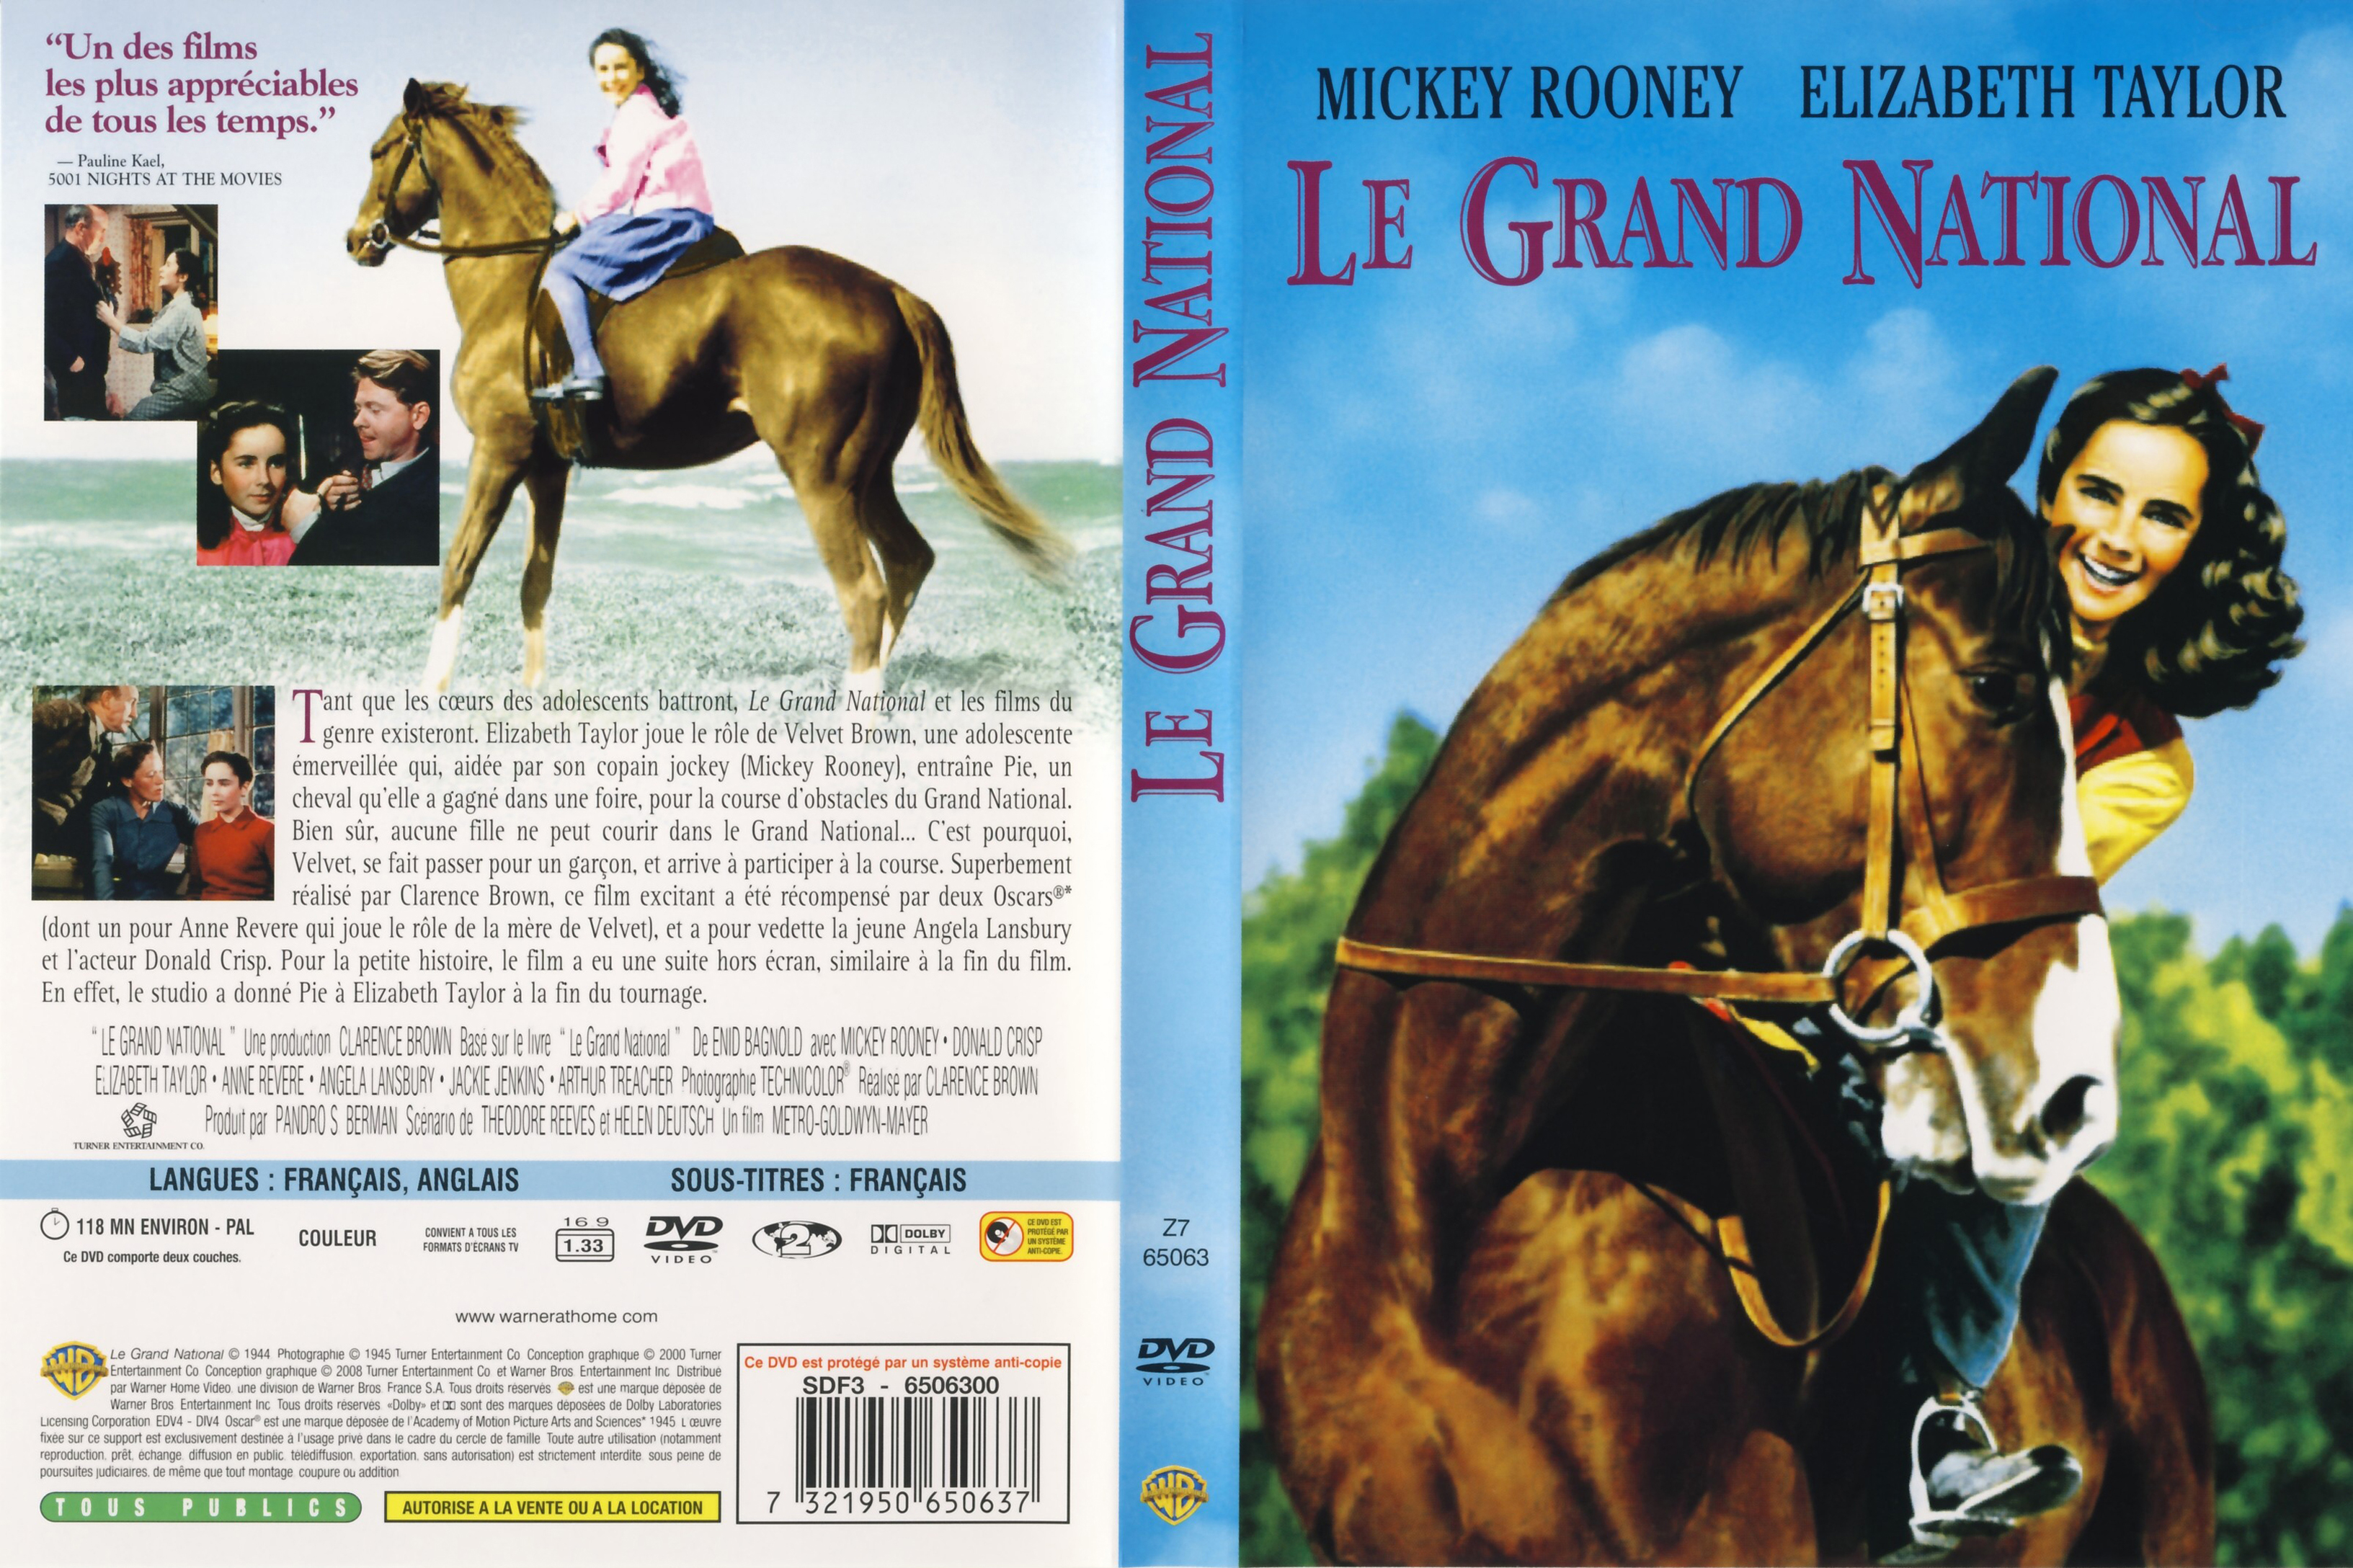 Jaquette DVD Le grand national (BLU-RAY)